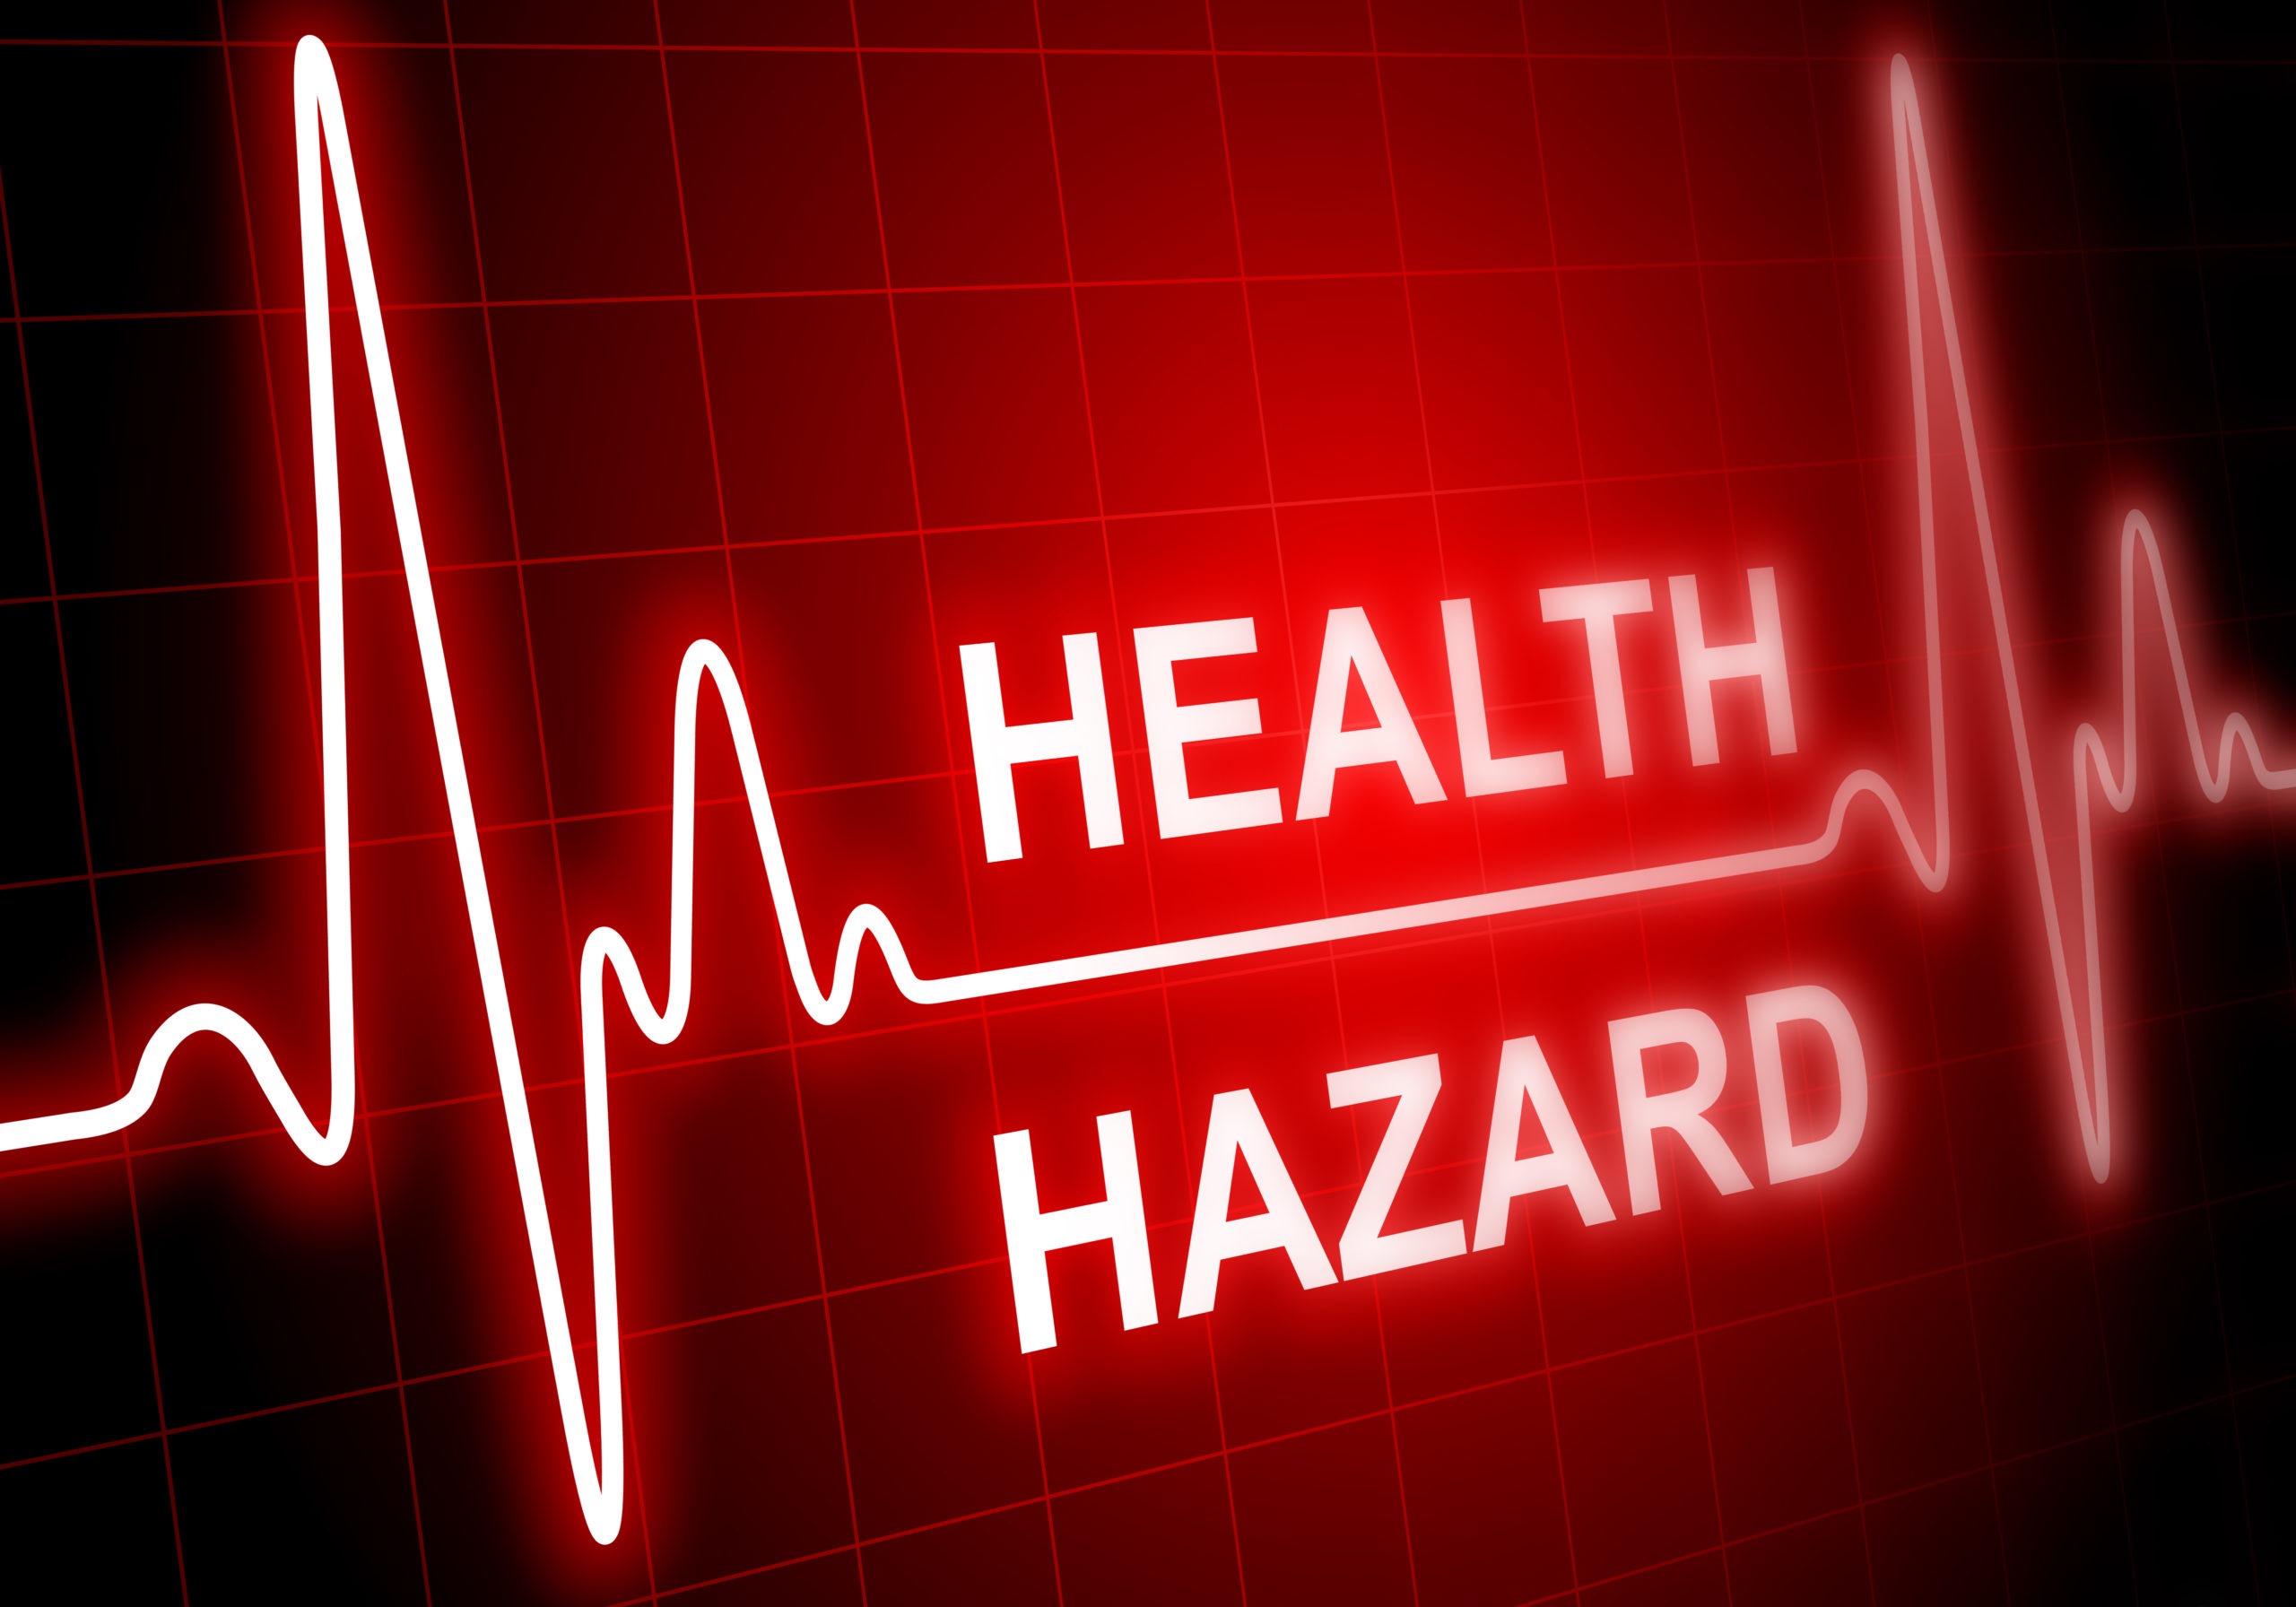 health hazards occurring in the workplace